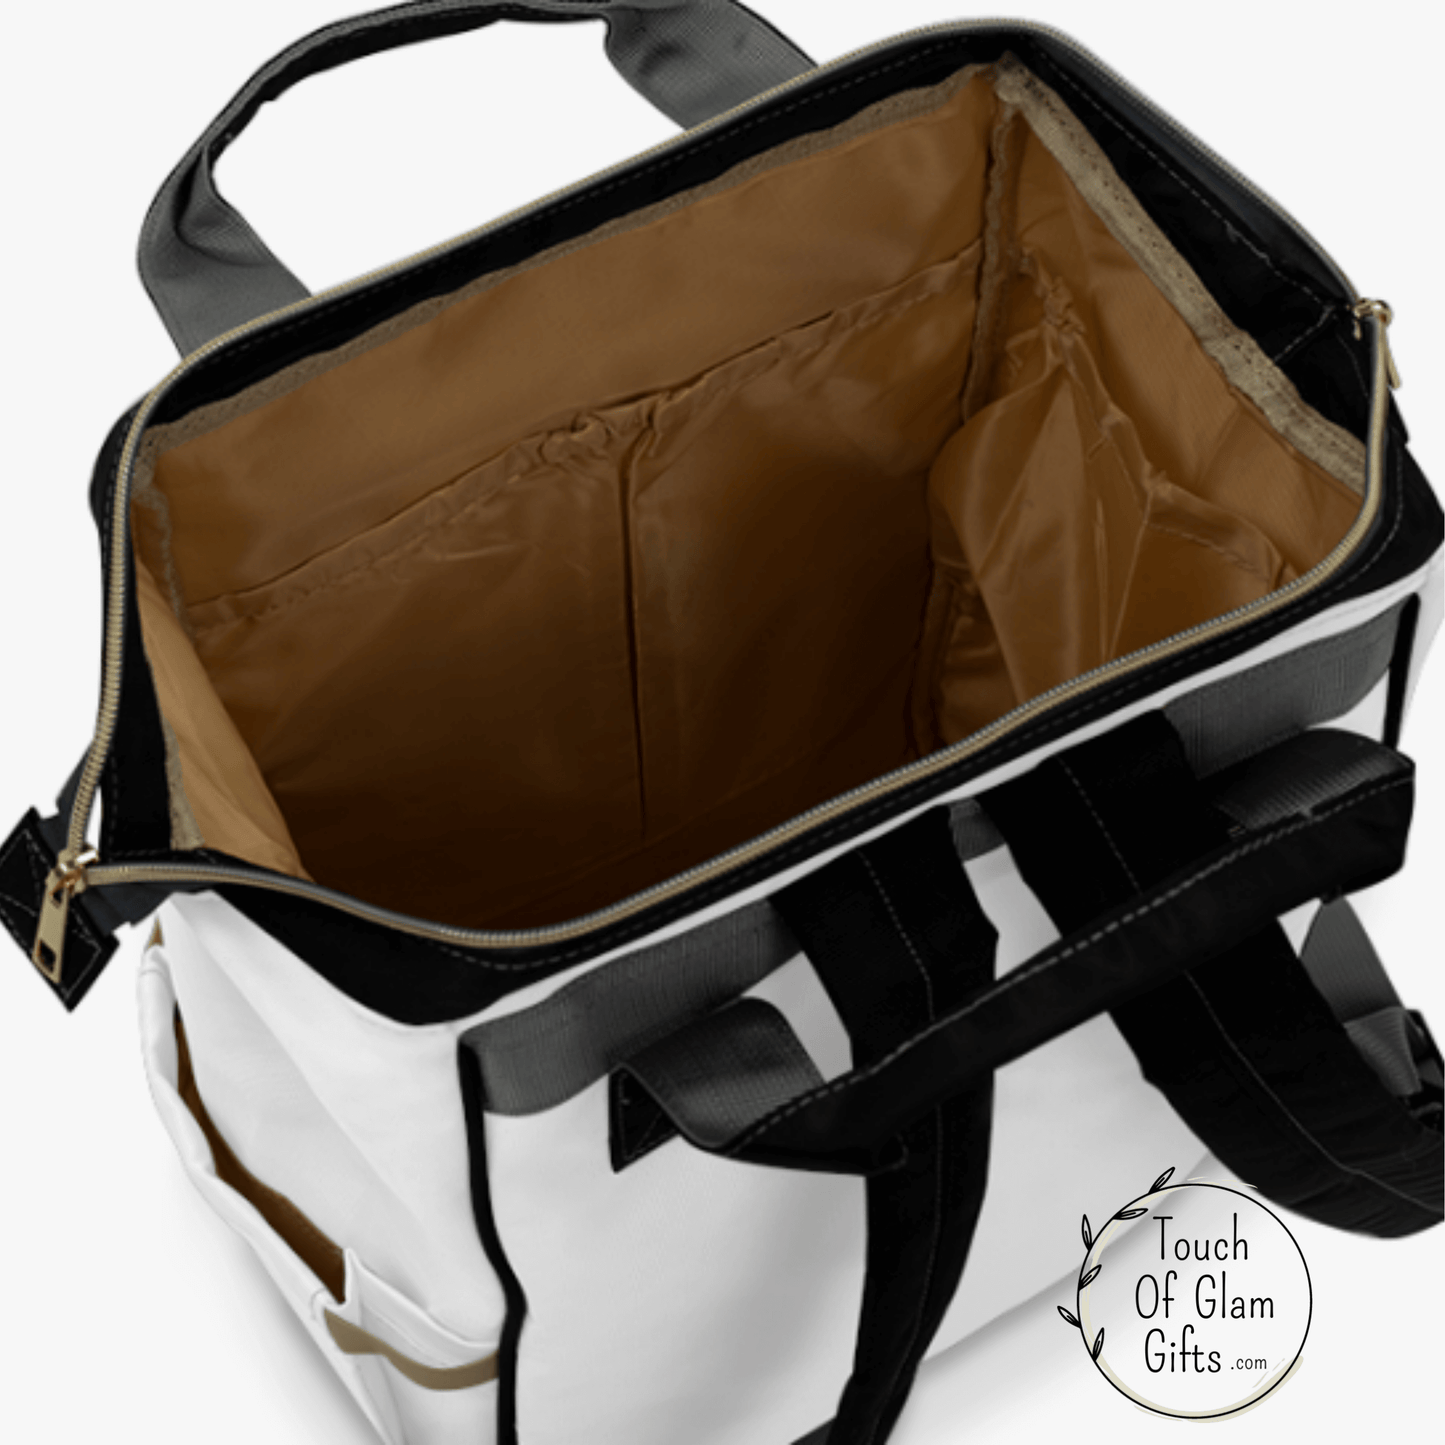 The inside of our diaper bag backpack shows the color is tan and the opening is large and the bag stands up on its own for convenience when finding your things.